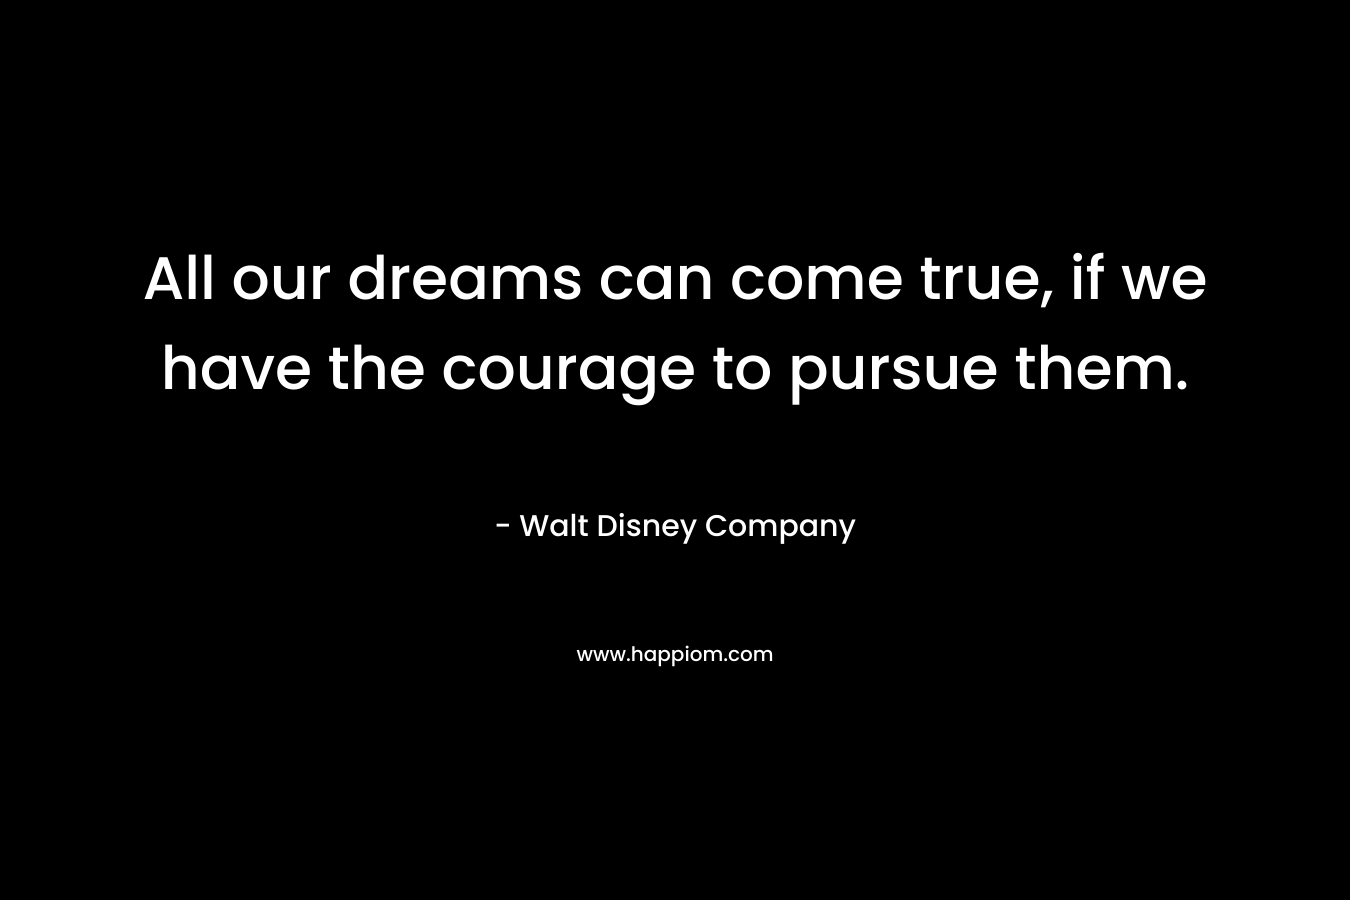 All our dreams can come true, if we have the courage to pursue them. – Walt Disney Company